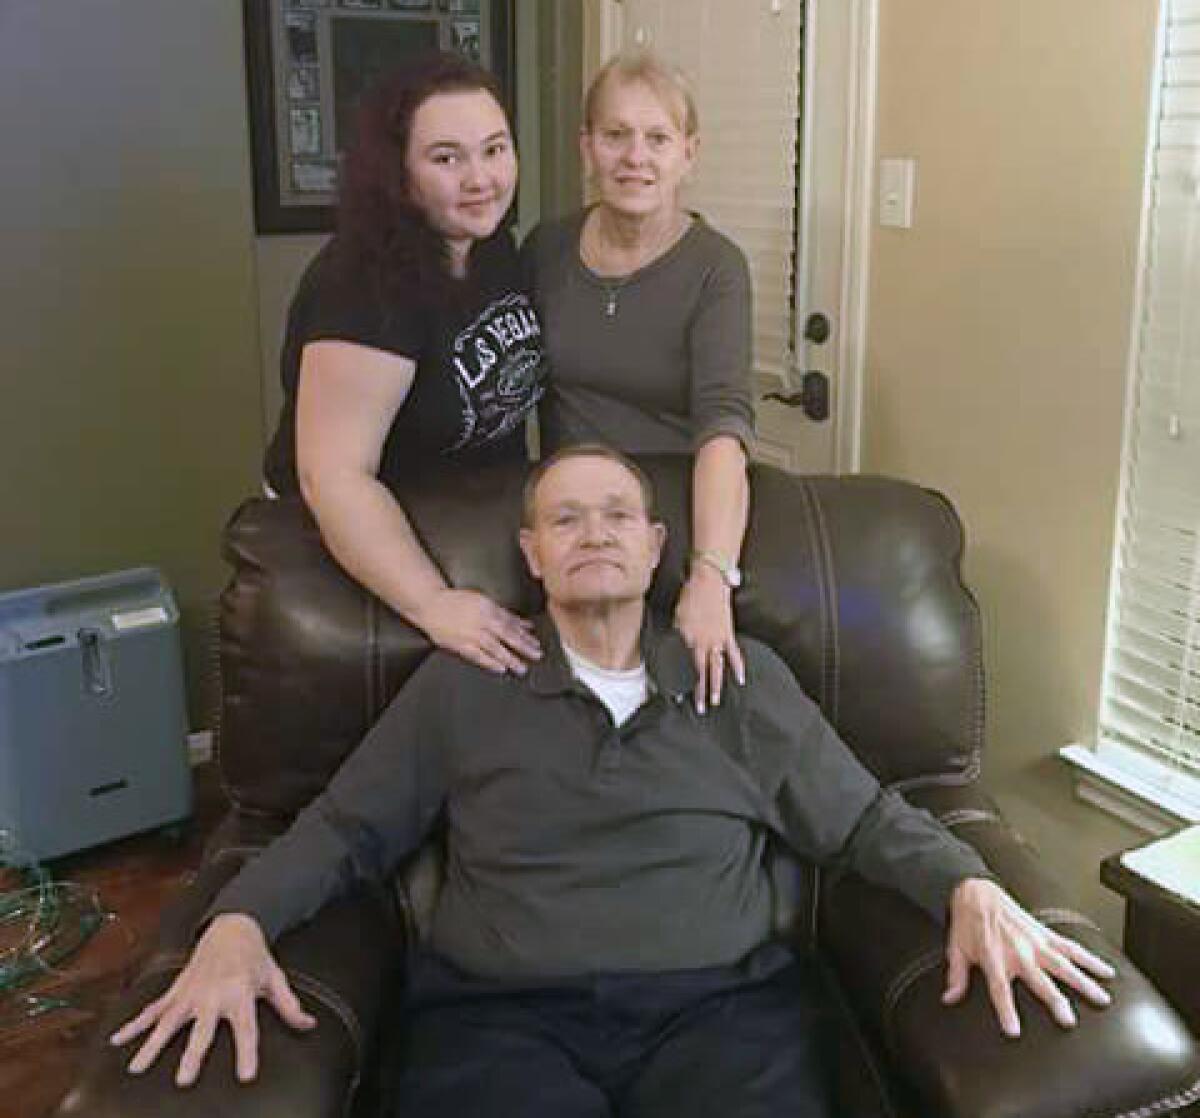 Cynthia Tisdale, top right, with her husband, William Recie Tisdale, and niece Leia Olinde.